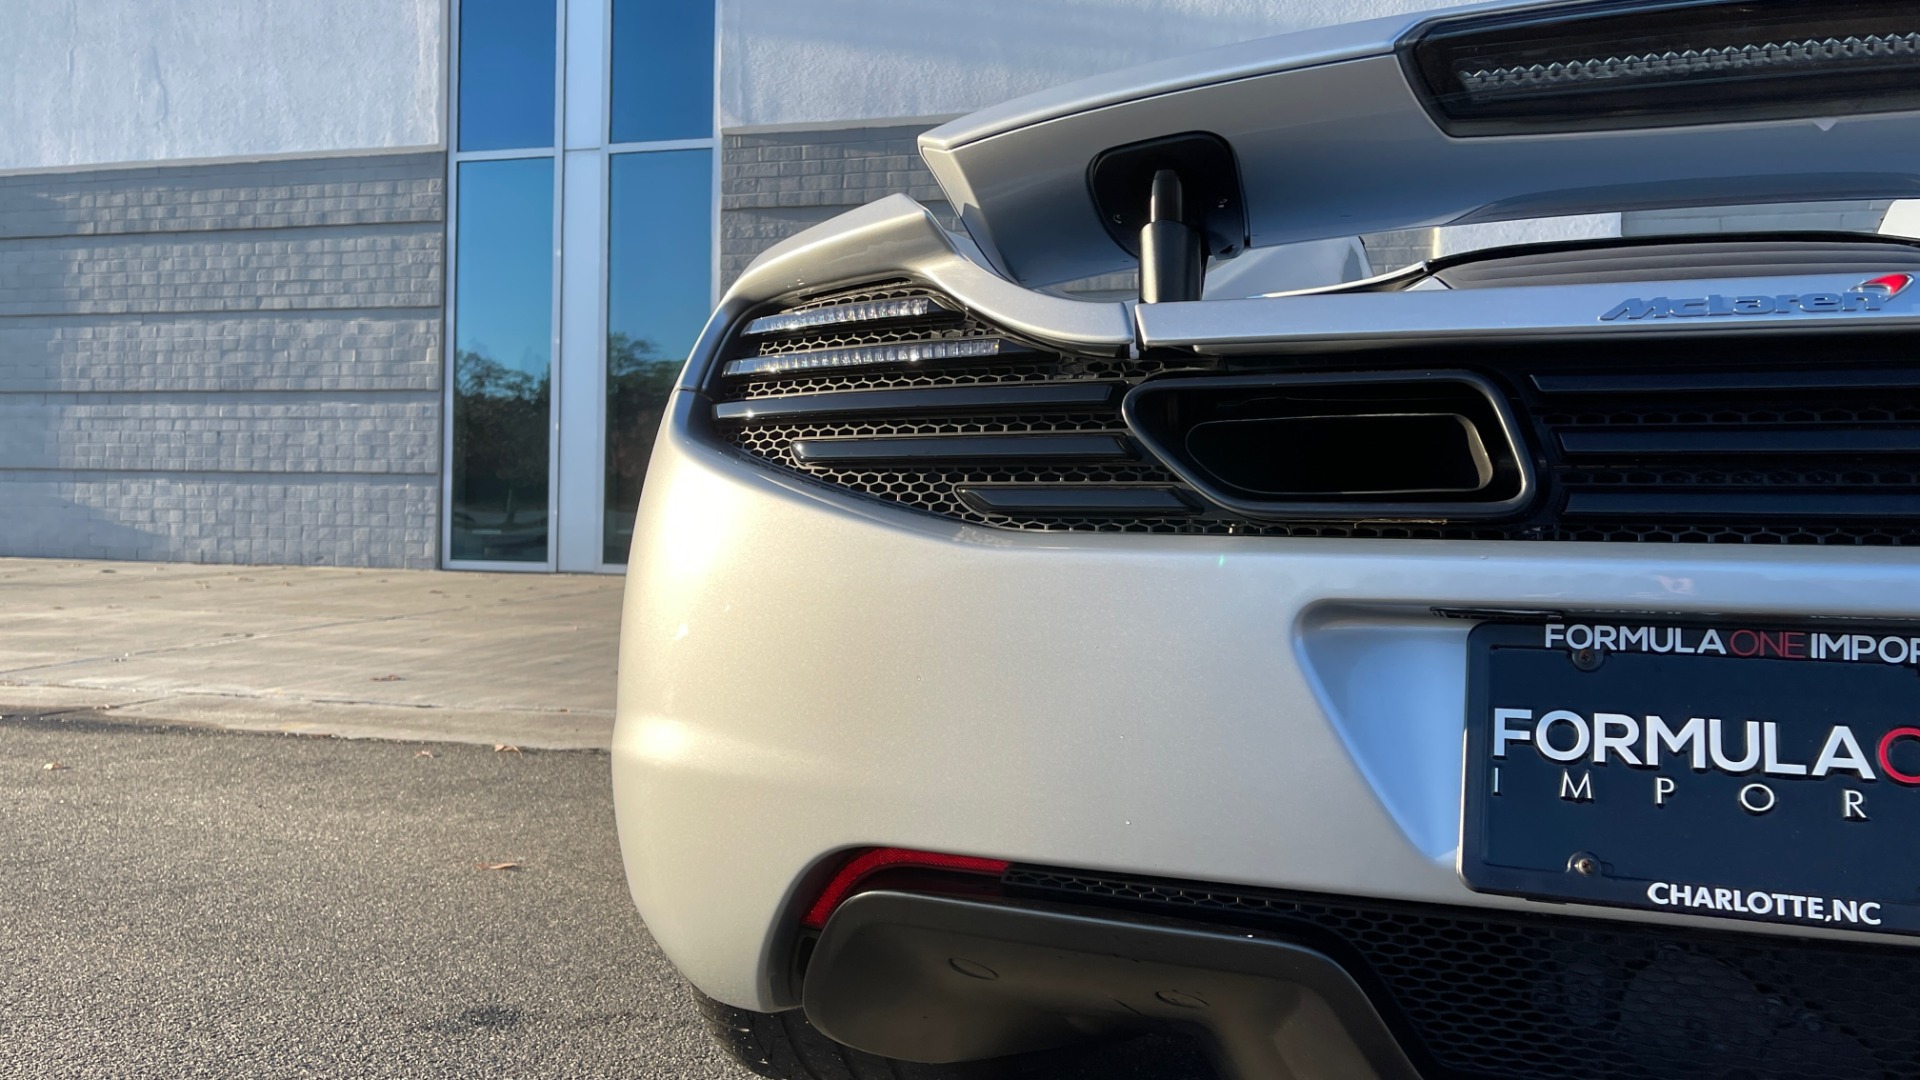 Used 2013 McLaren MP4 12C SPIDER 3.8L TURBO V8 616HP / 7AM TRANS / NAV / MERIDIAN SND for sale $145,000 at Formula Imports in Charlotte NC 28227 27